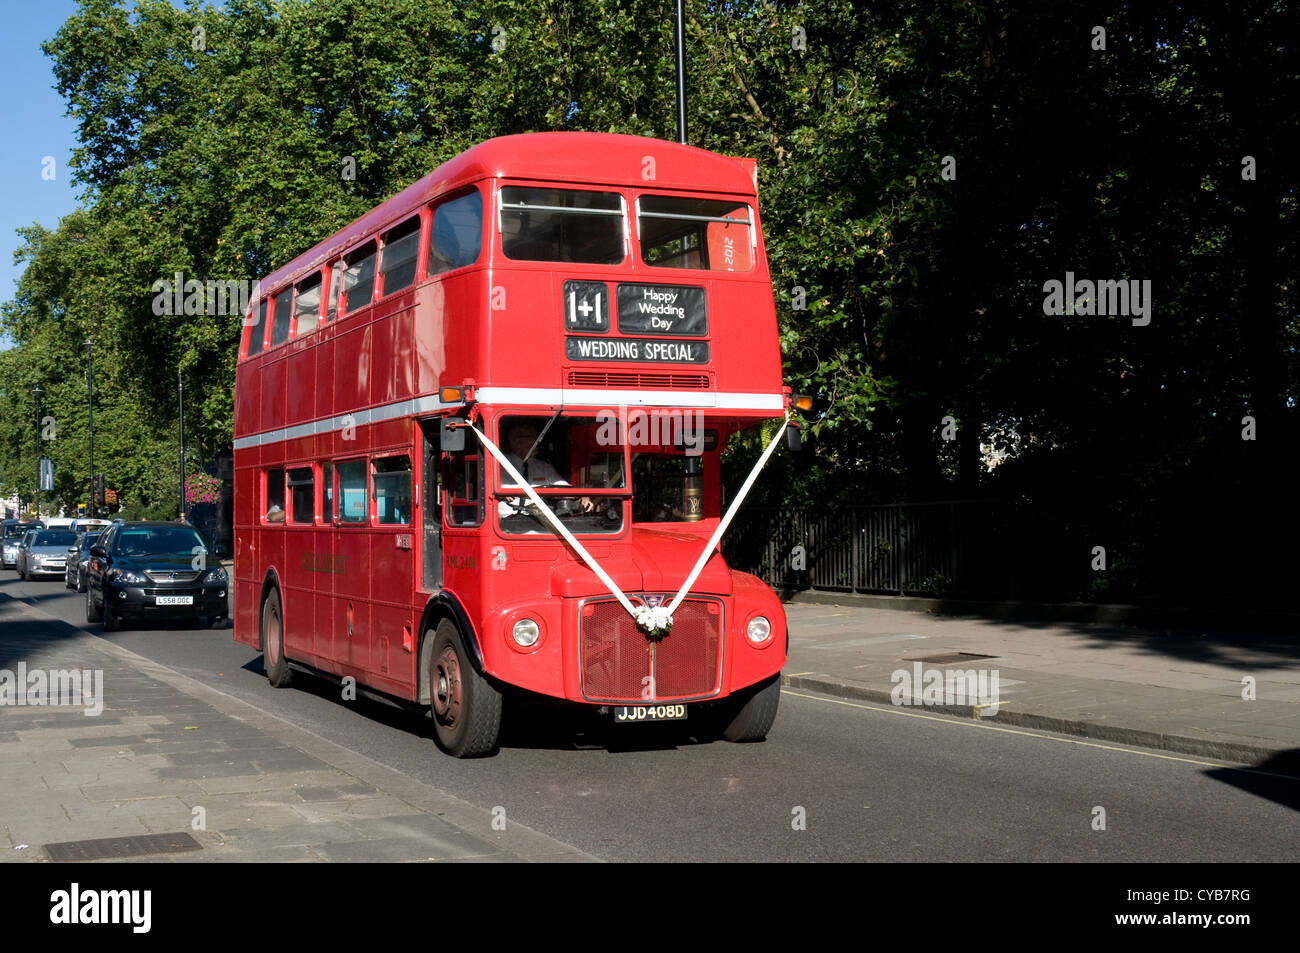 A former London Transport Routemaster bus is decorated as a wedding special vehicle. The bus is passing along Piccadilly, London Stock Photo